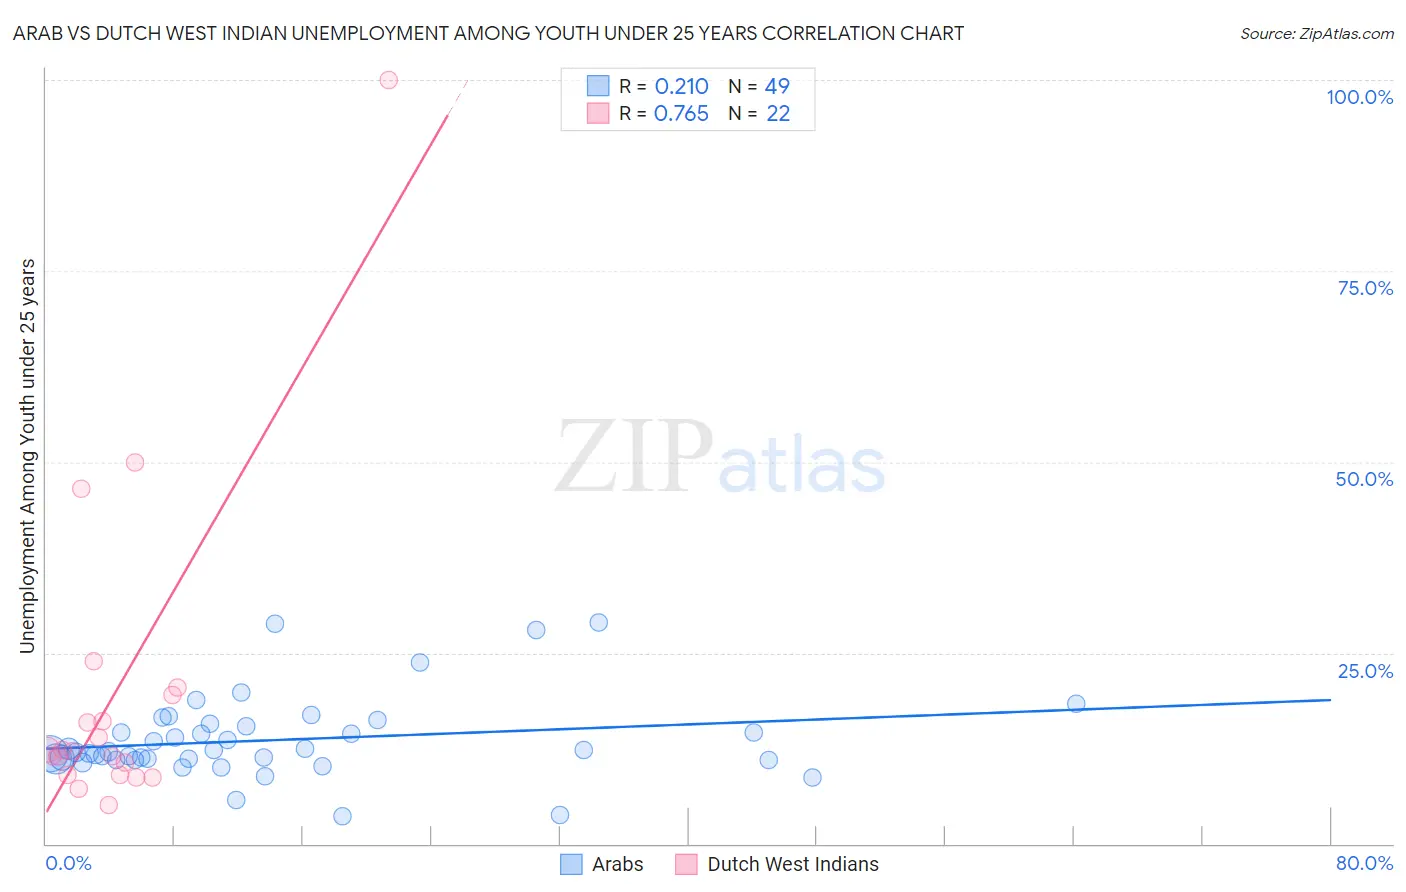 Arab vs Dutch West Indian Unemployment Among Youth under 25 years